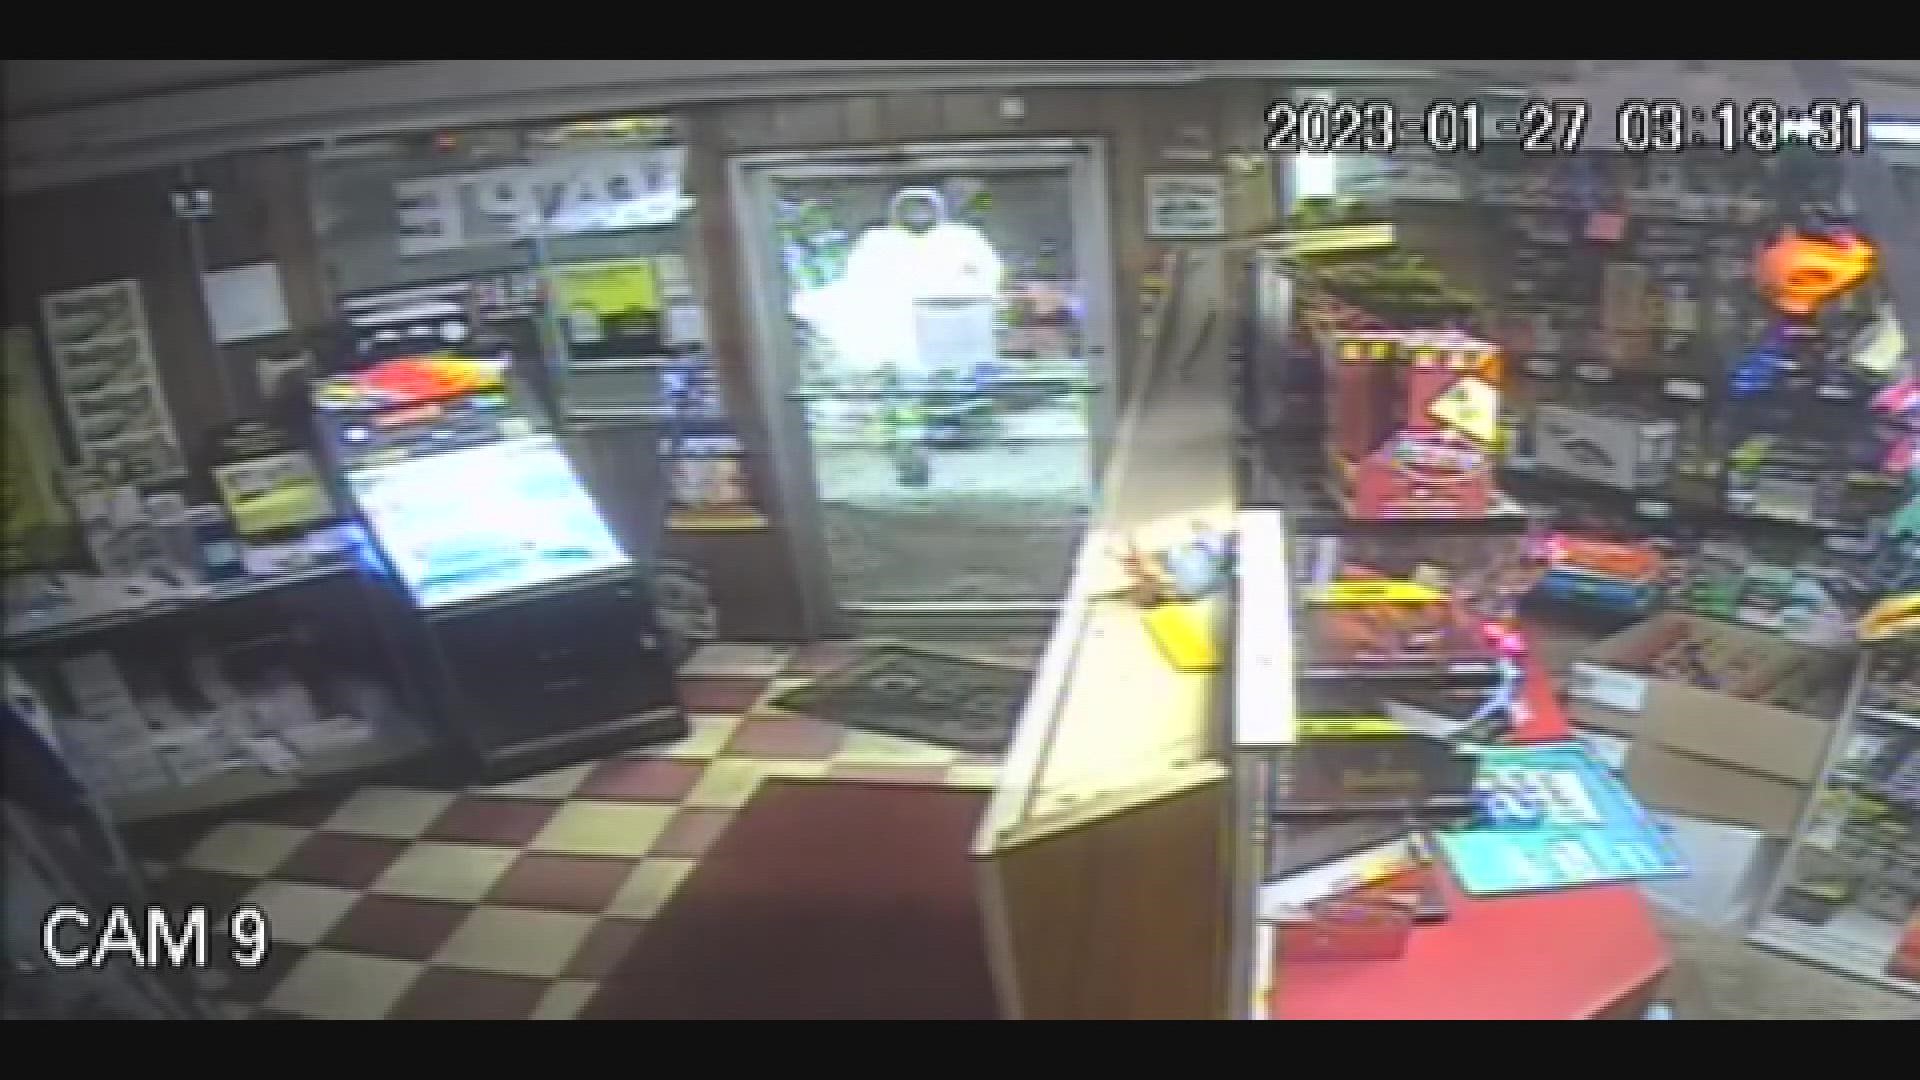 A business on 44th street in Kentwood shared surveillance video of six people breaking in and grabbing tobacco products.